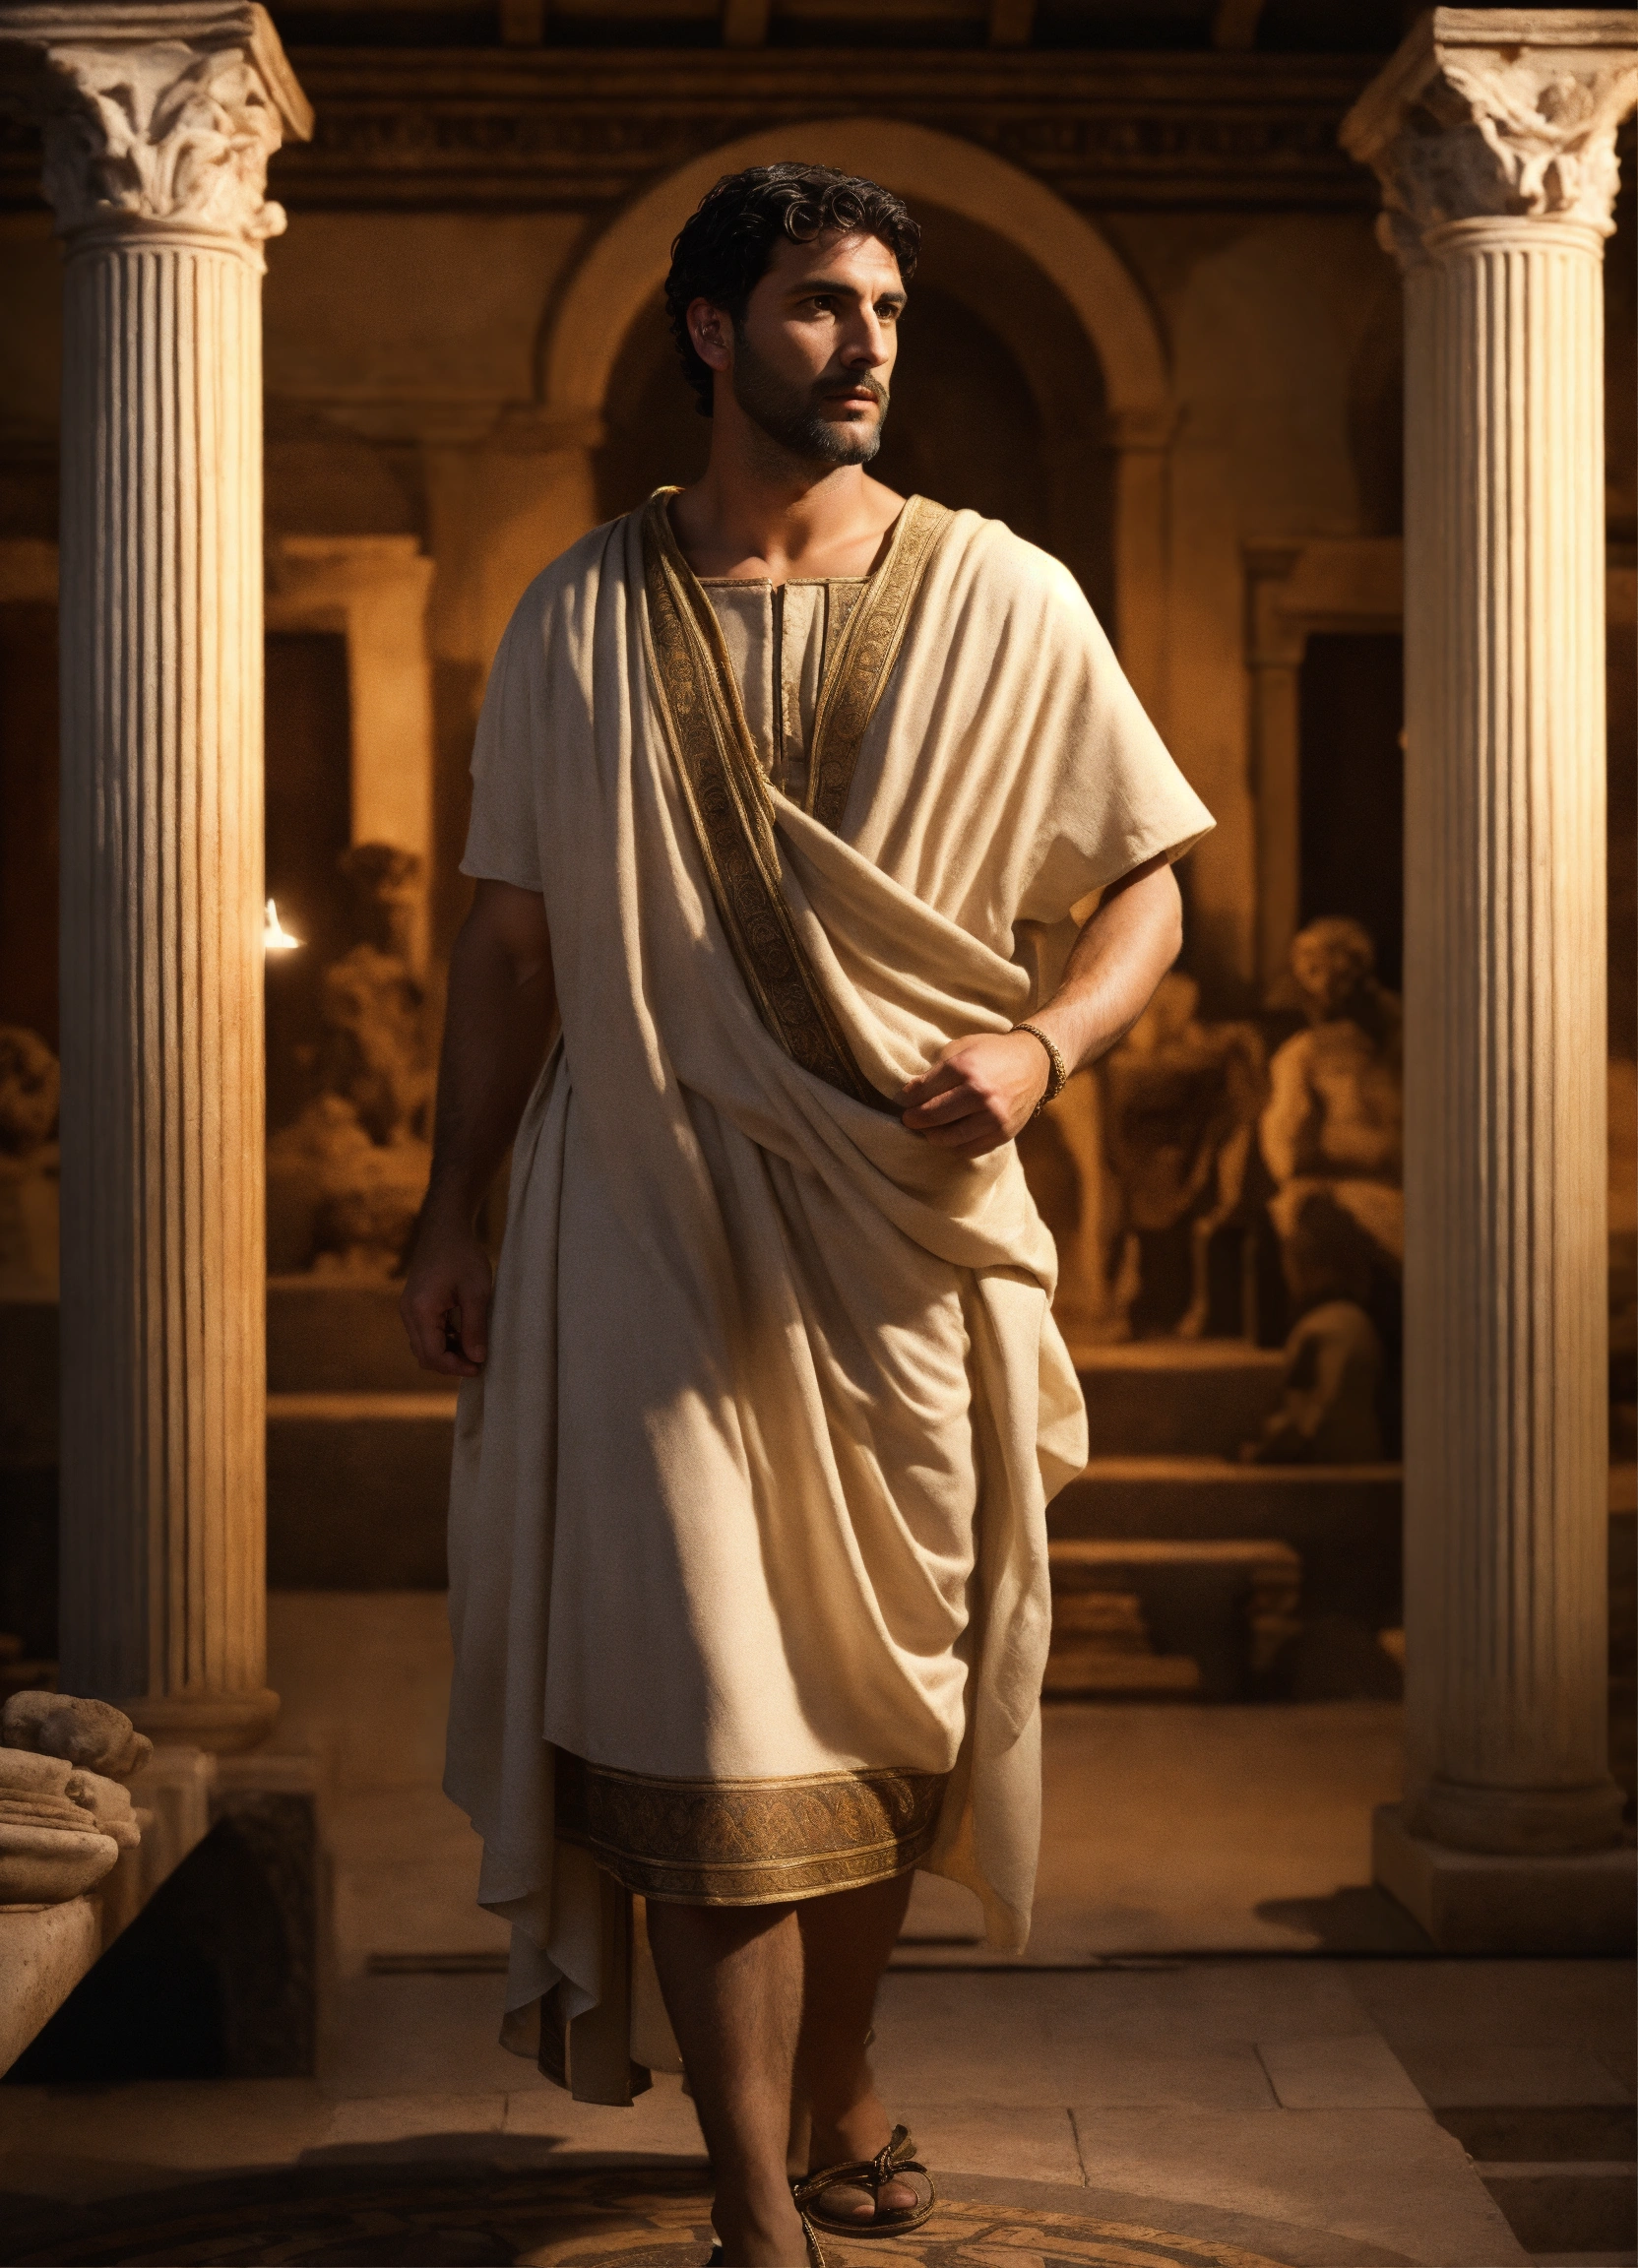 Lexica - A young rich handsome roman man wearing a light-colored tunic ...